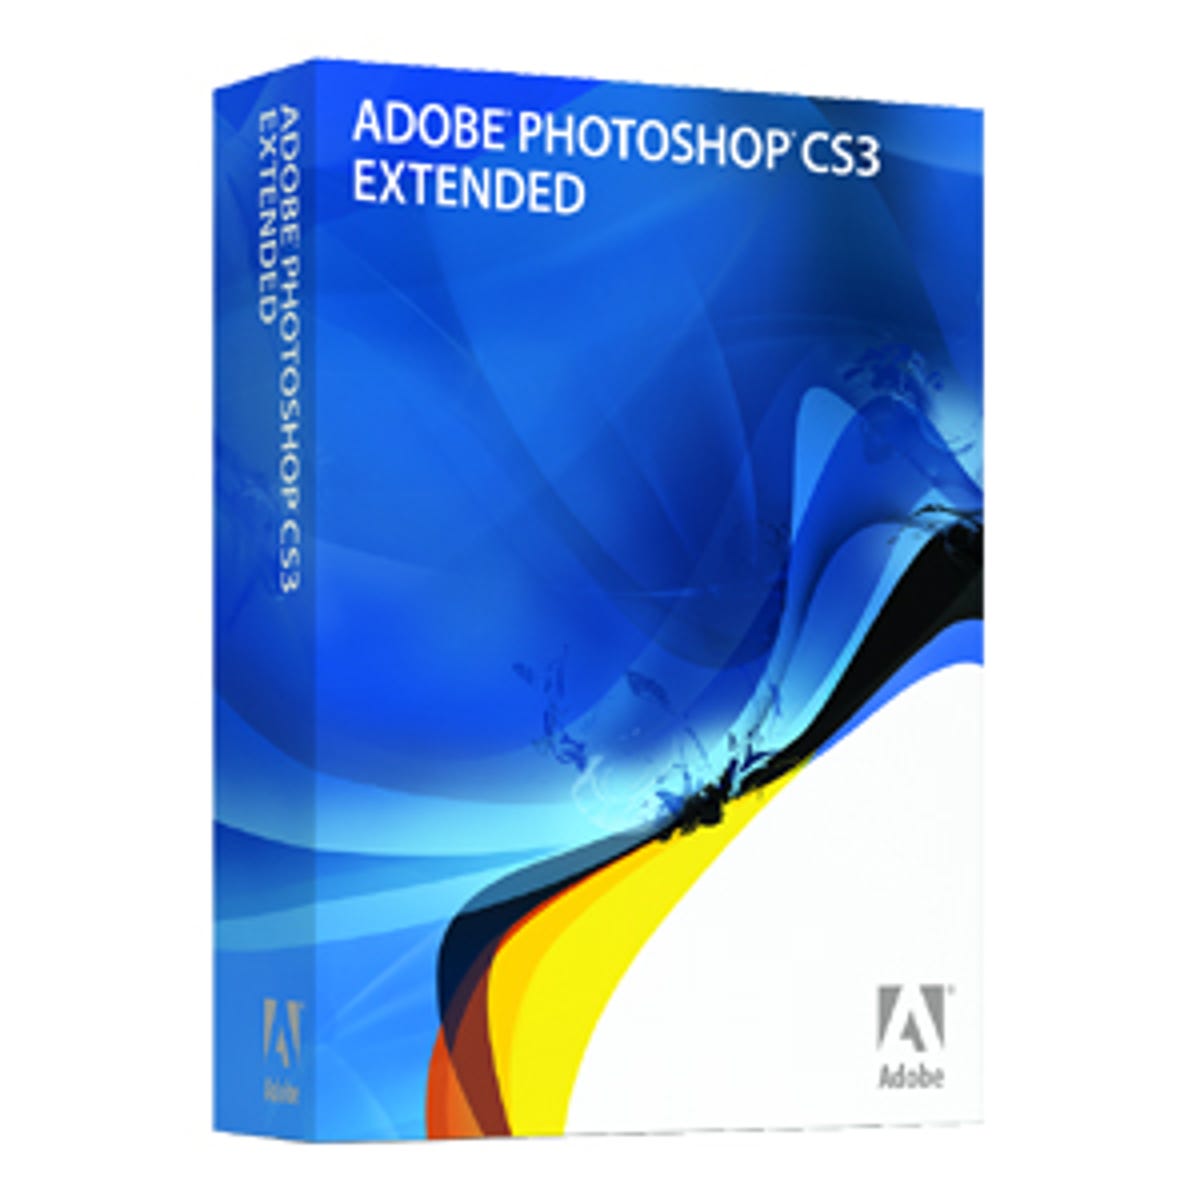 Adobe Photoshop CS3 Extended review: Adobe Photoshop CS3 Extended - CNET